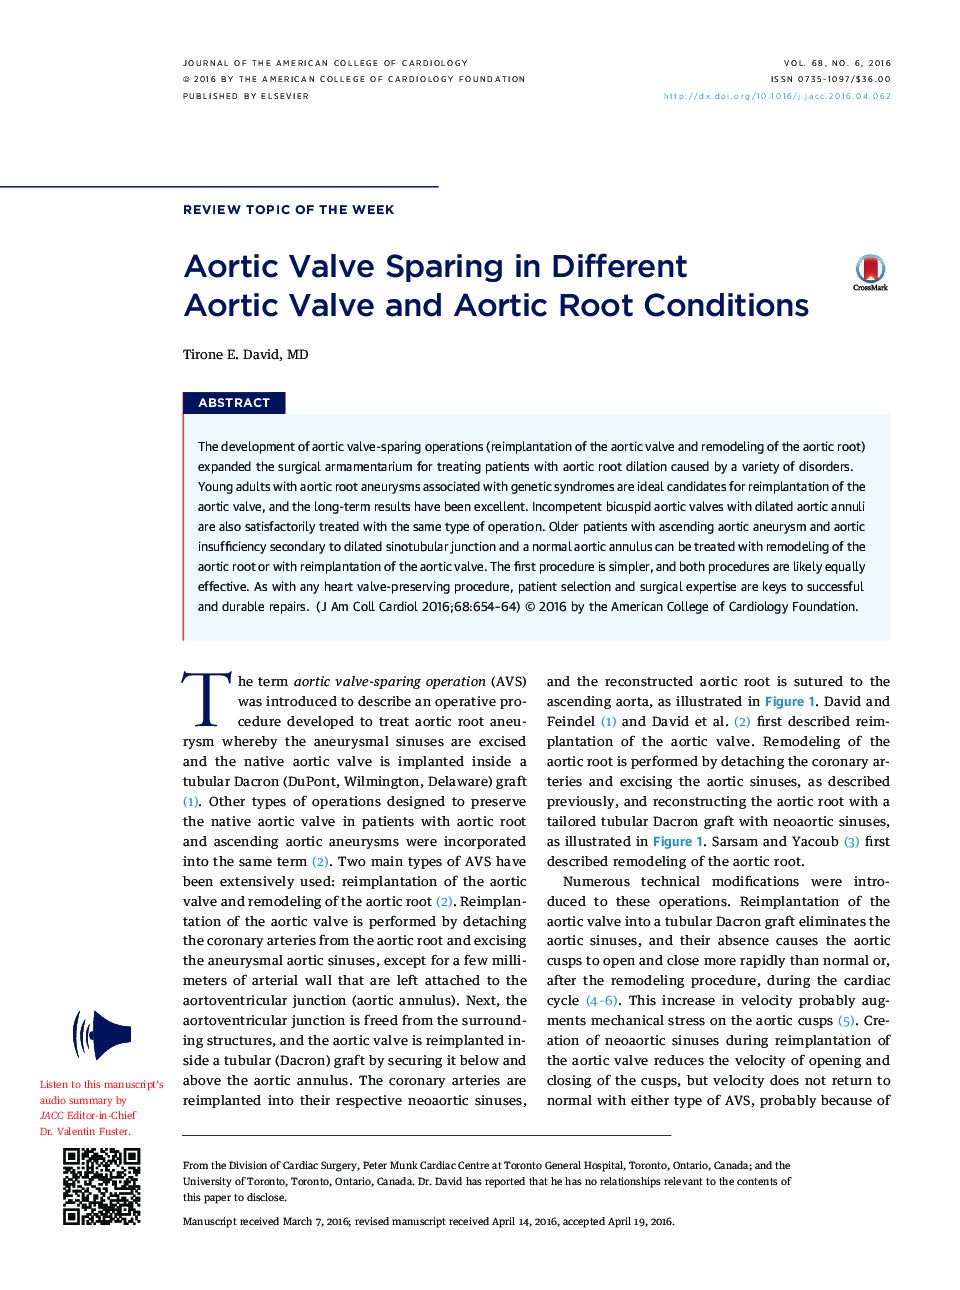 Aortic Valve Sparing in Different Aortic Valve and Aortic Root Conditions 